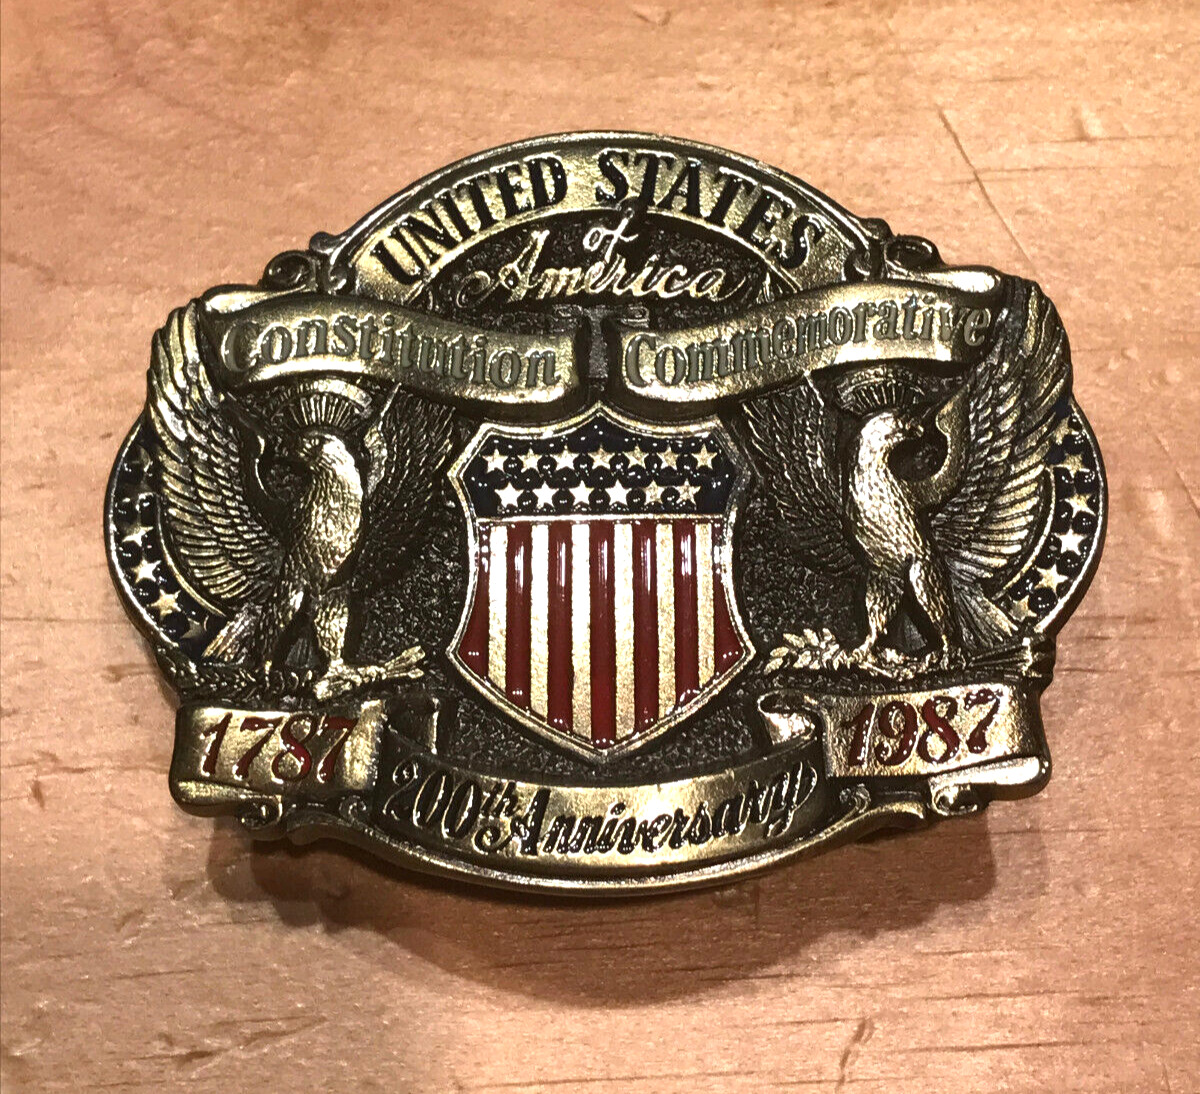 VINTAGE UNITED STATES OF AMERICA 200th ANNIVERSARY CONSTITUTION BELT BUCKLE